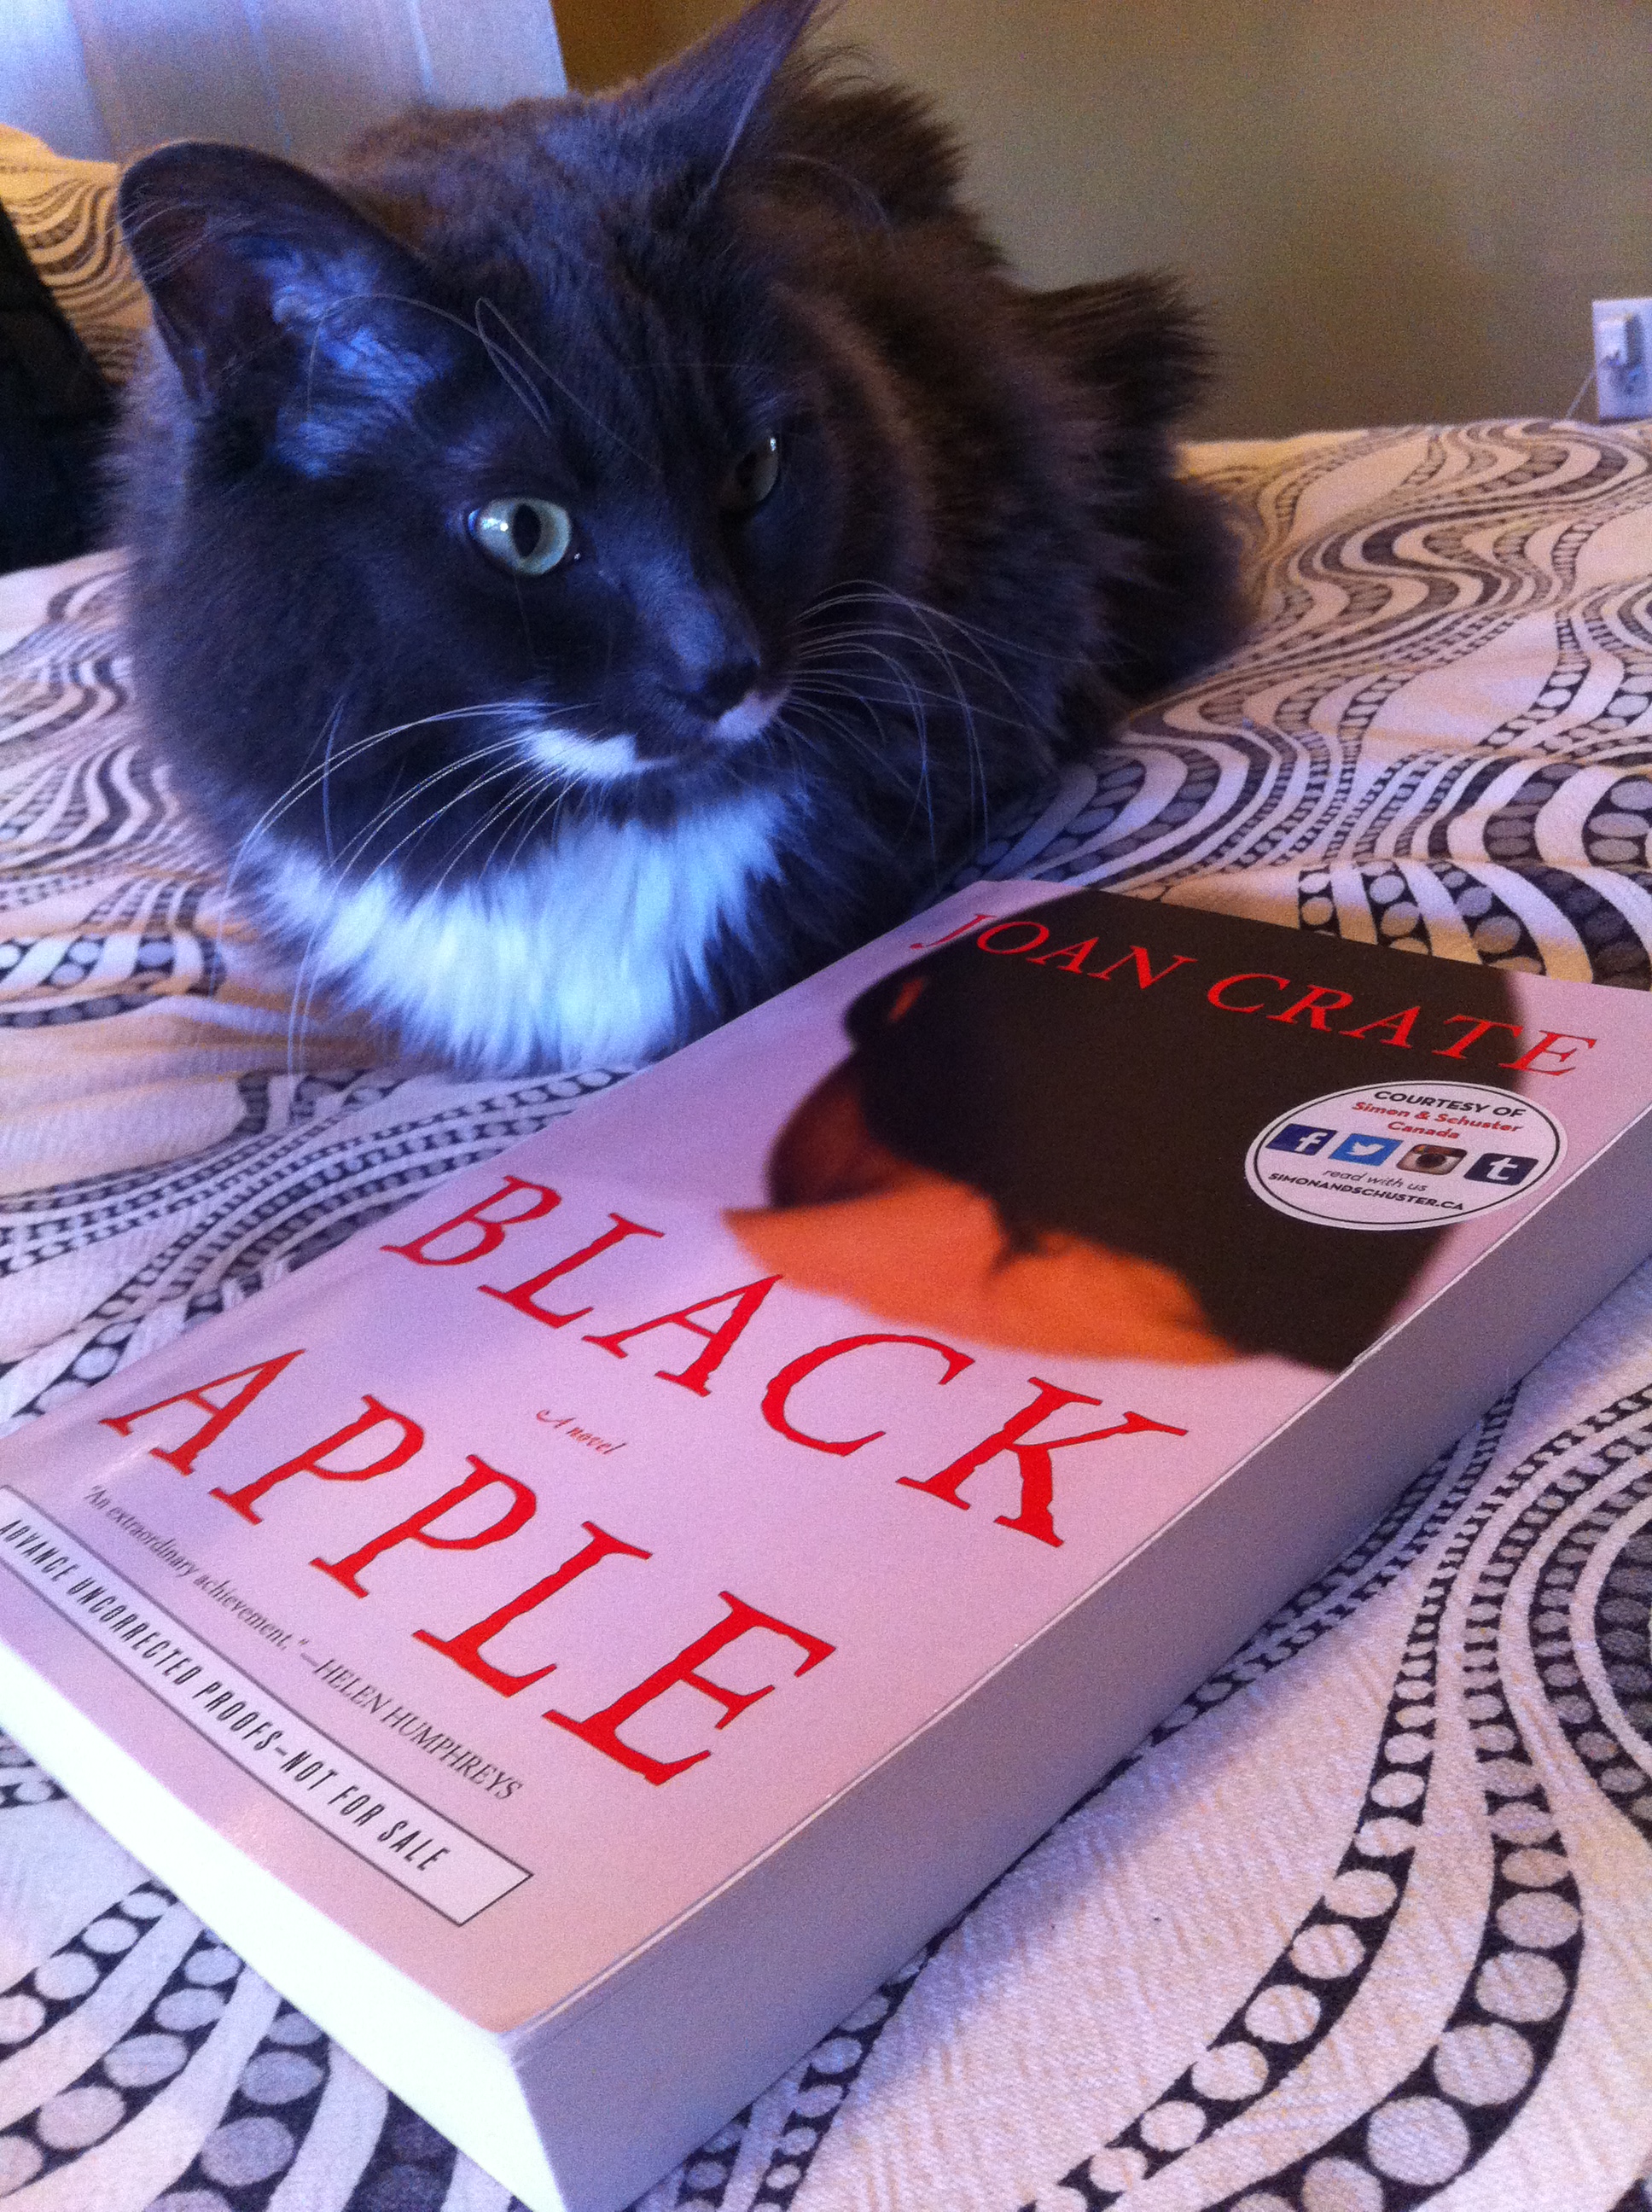 Smokey is clearly a fan of this book too